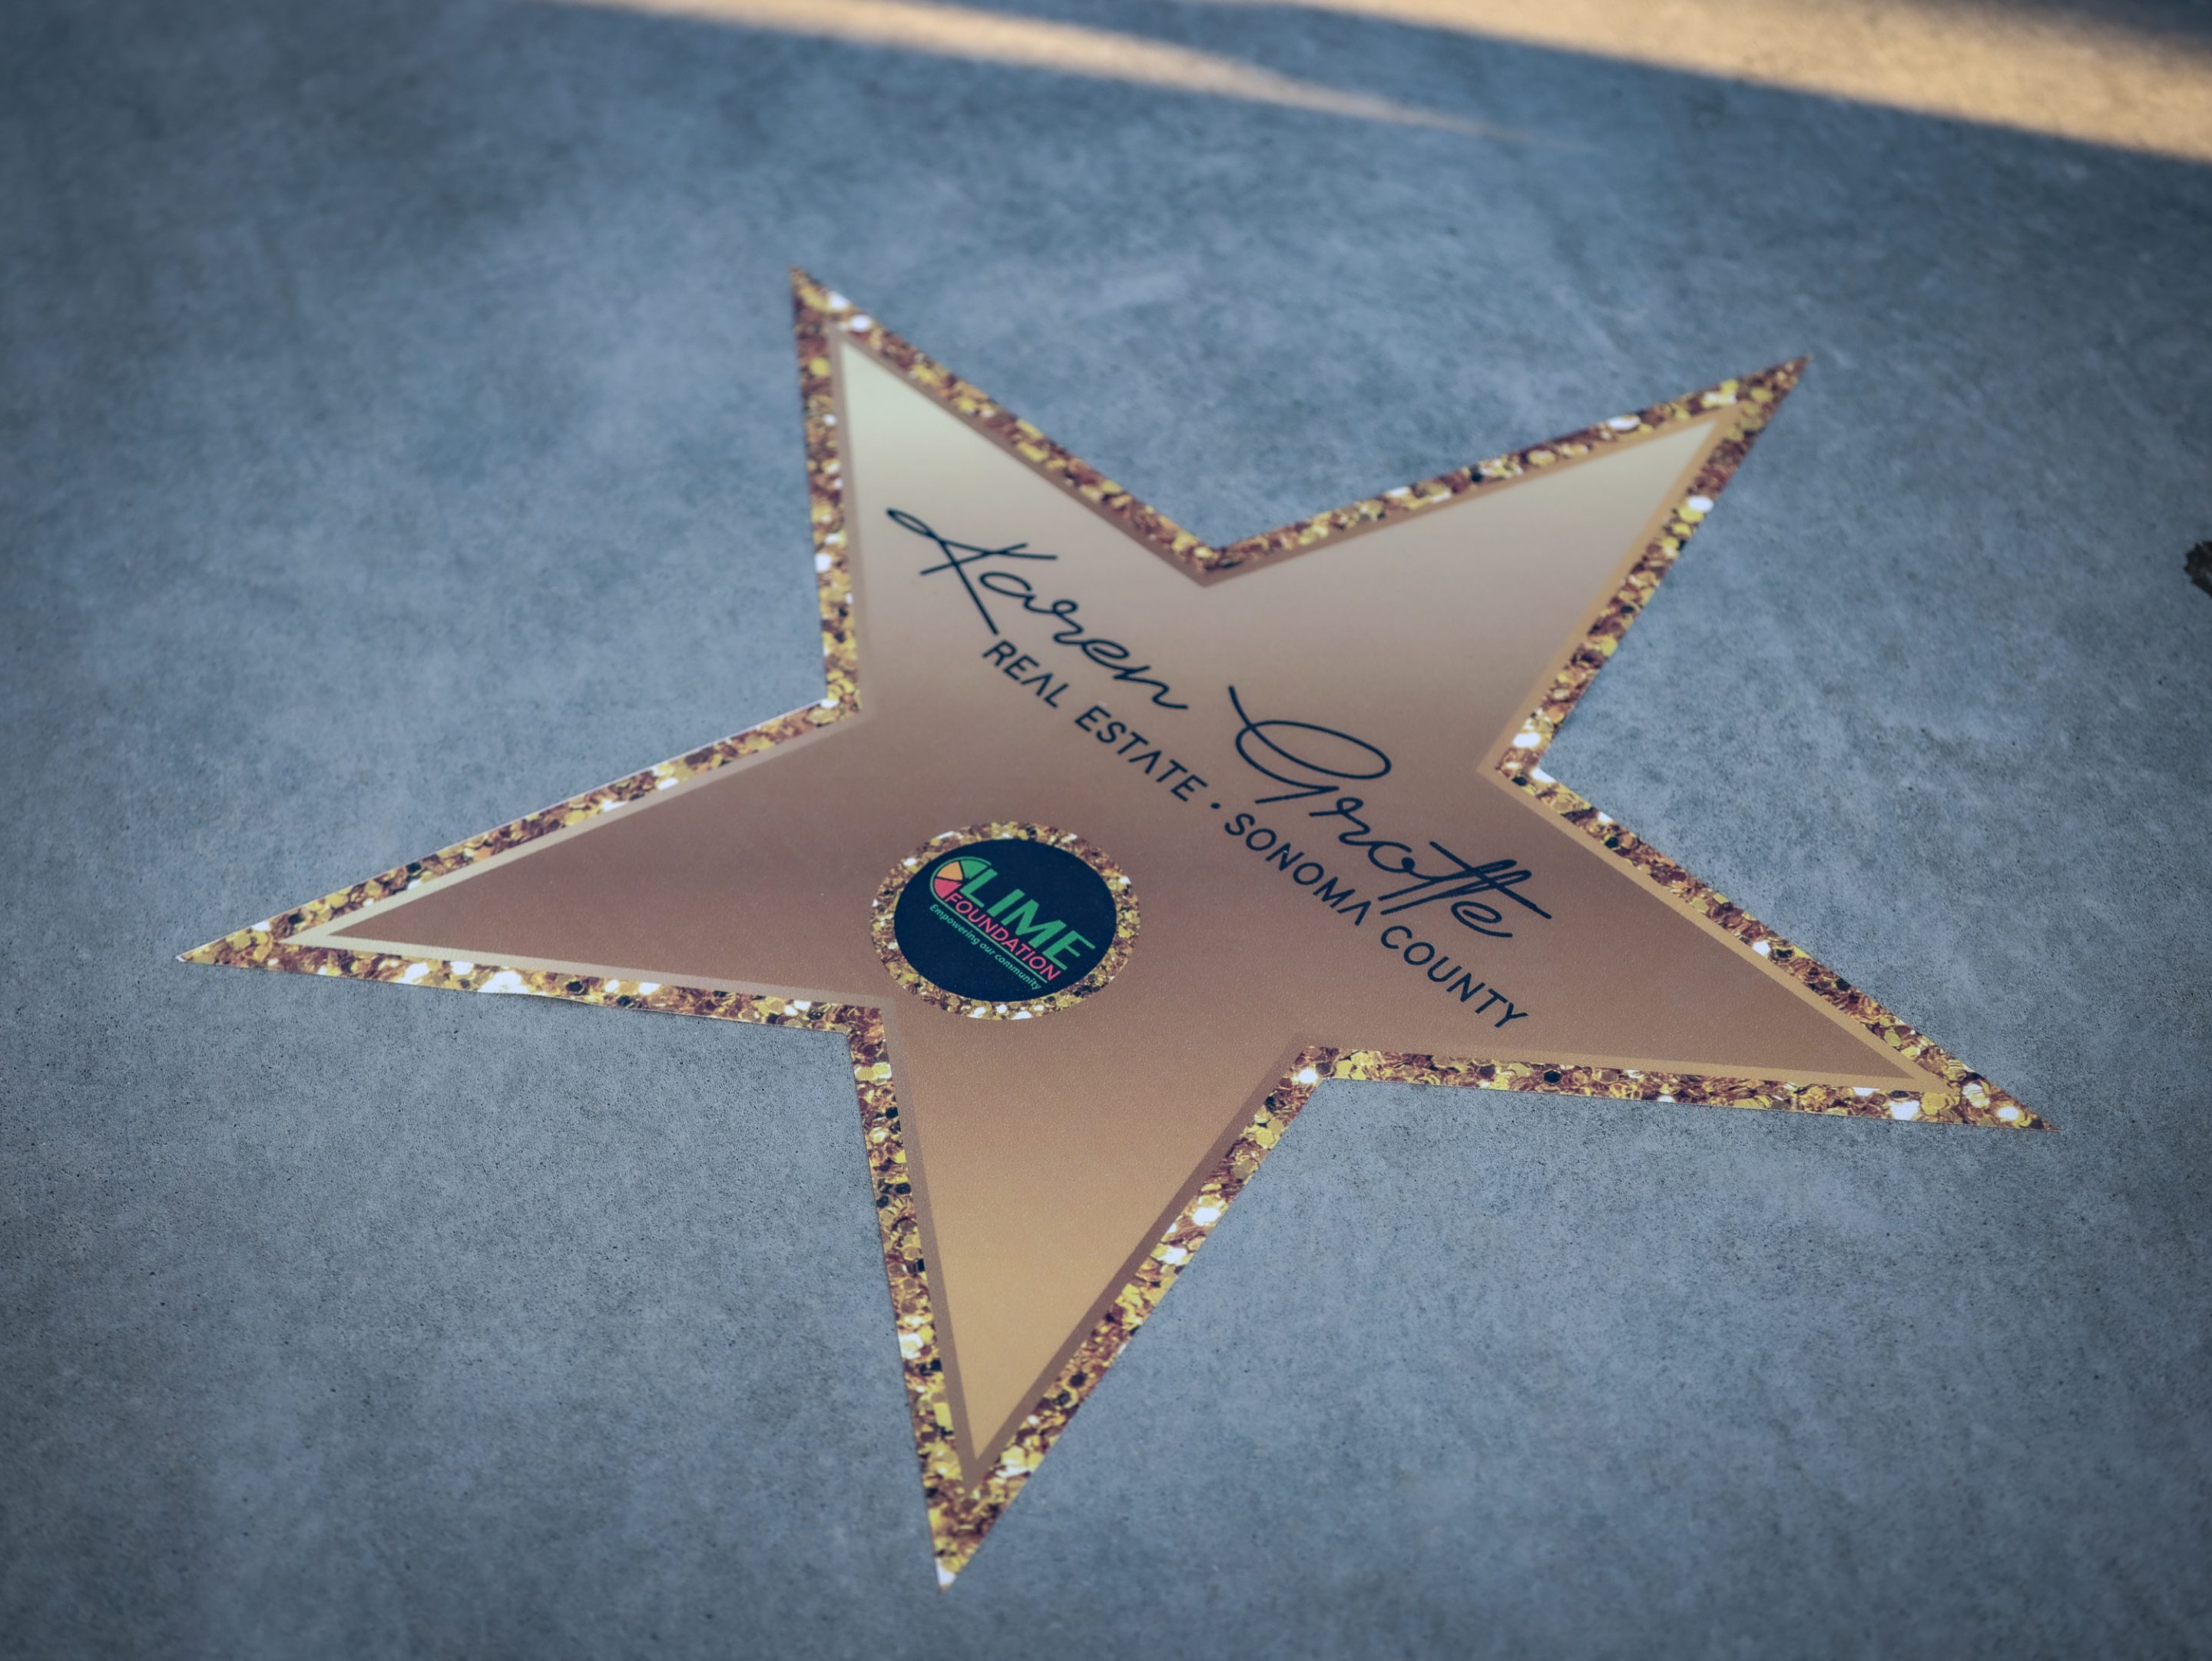 A star on the sidewalk with a name belonging to a Sonoma County Non-Profit organization.